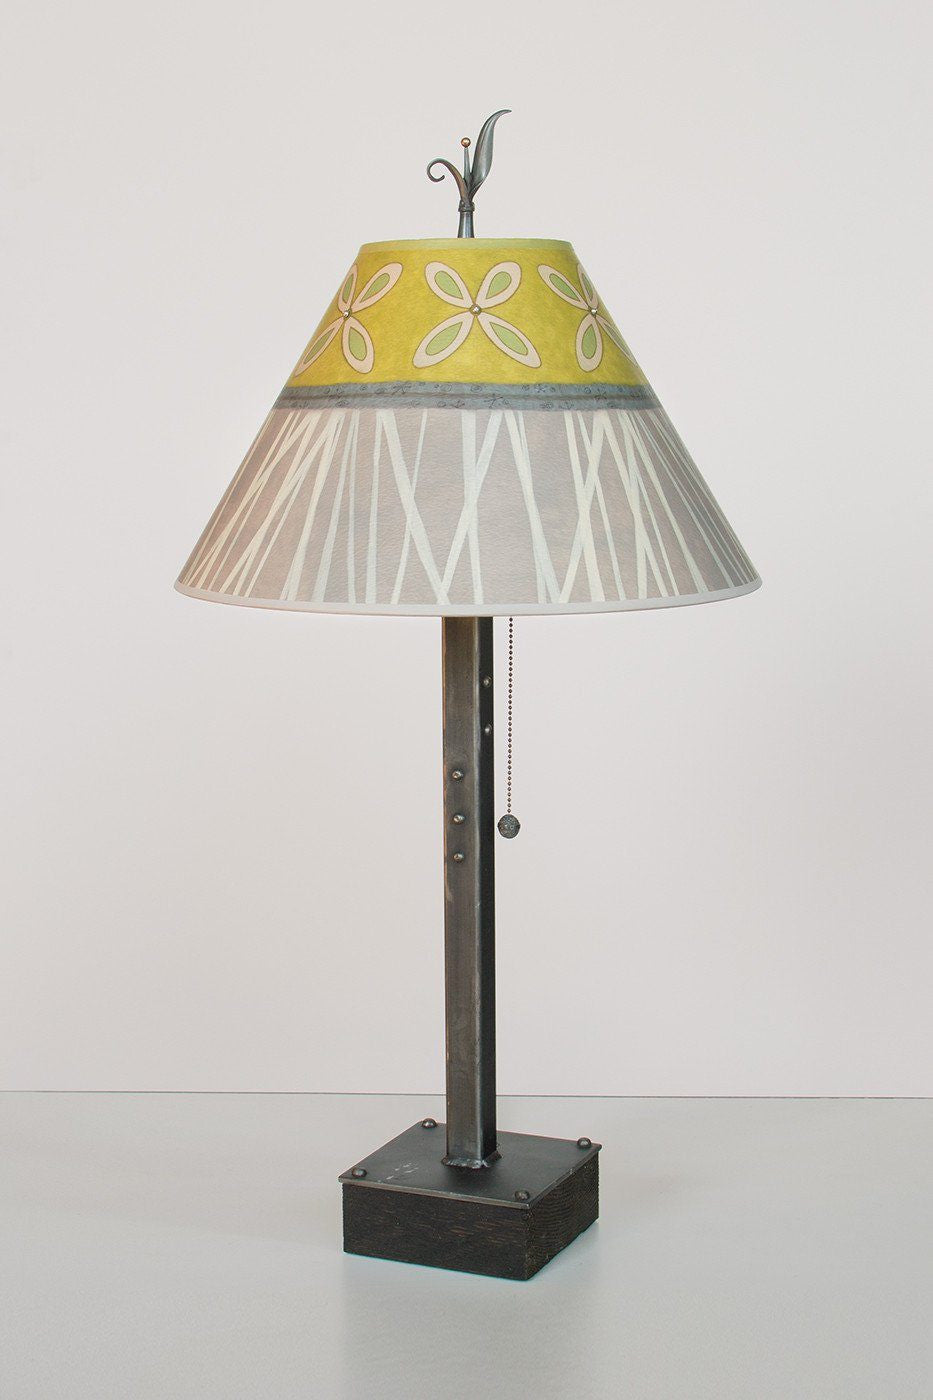 Janna Ugone & Co Table Lamps Steel Table Lamp on Wood with Medium Conical Shade in Kiwi